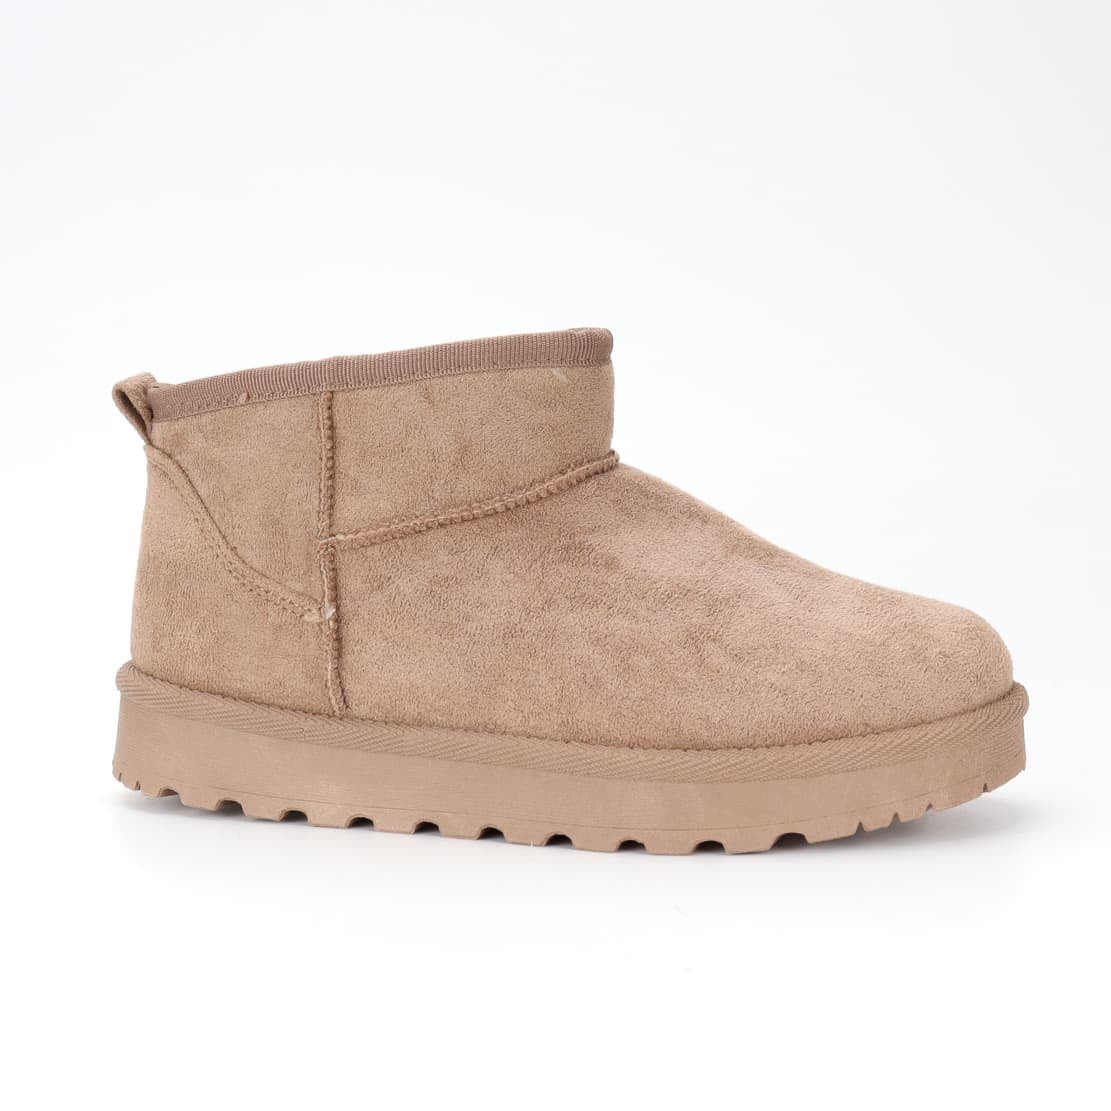 Fluffy Boots - Beige